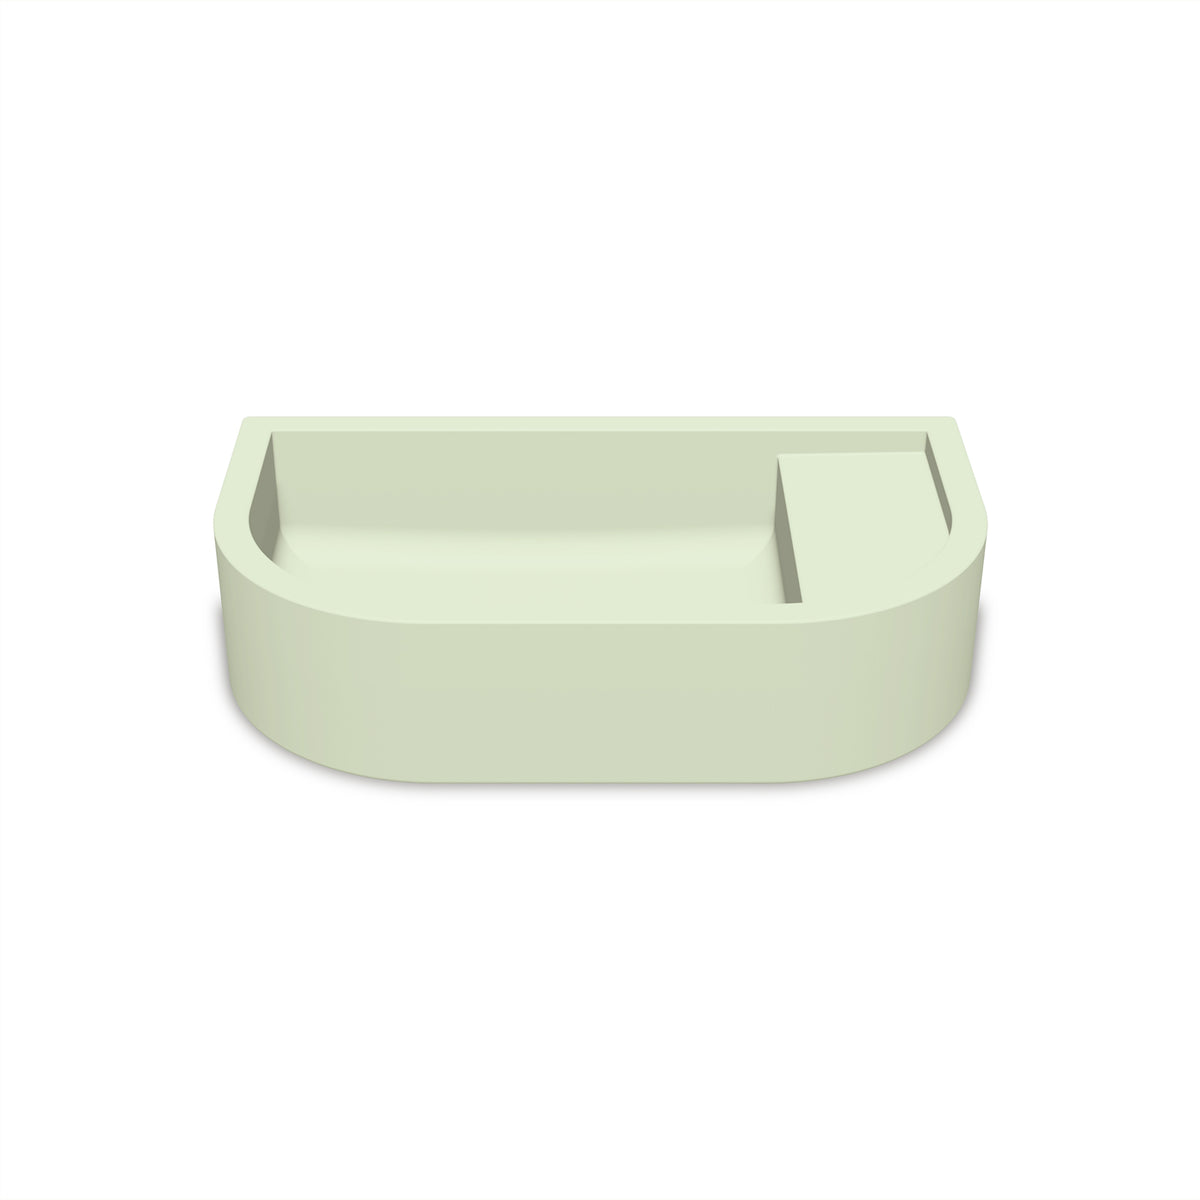 Loop 02 Basin - Overflow - Surface Mount (Mint,No Tap Hole,White)